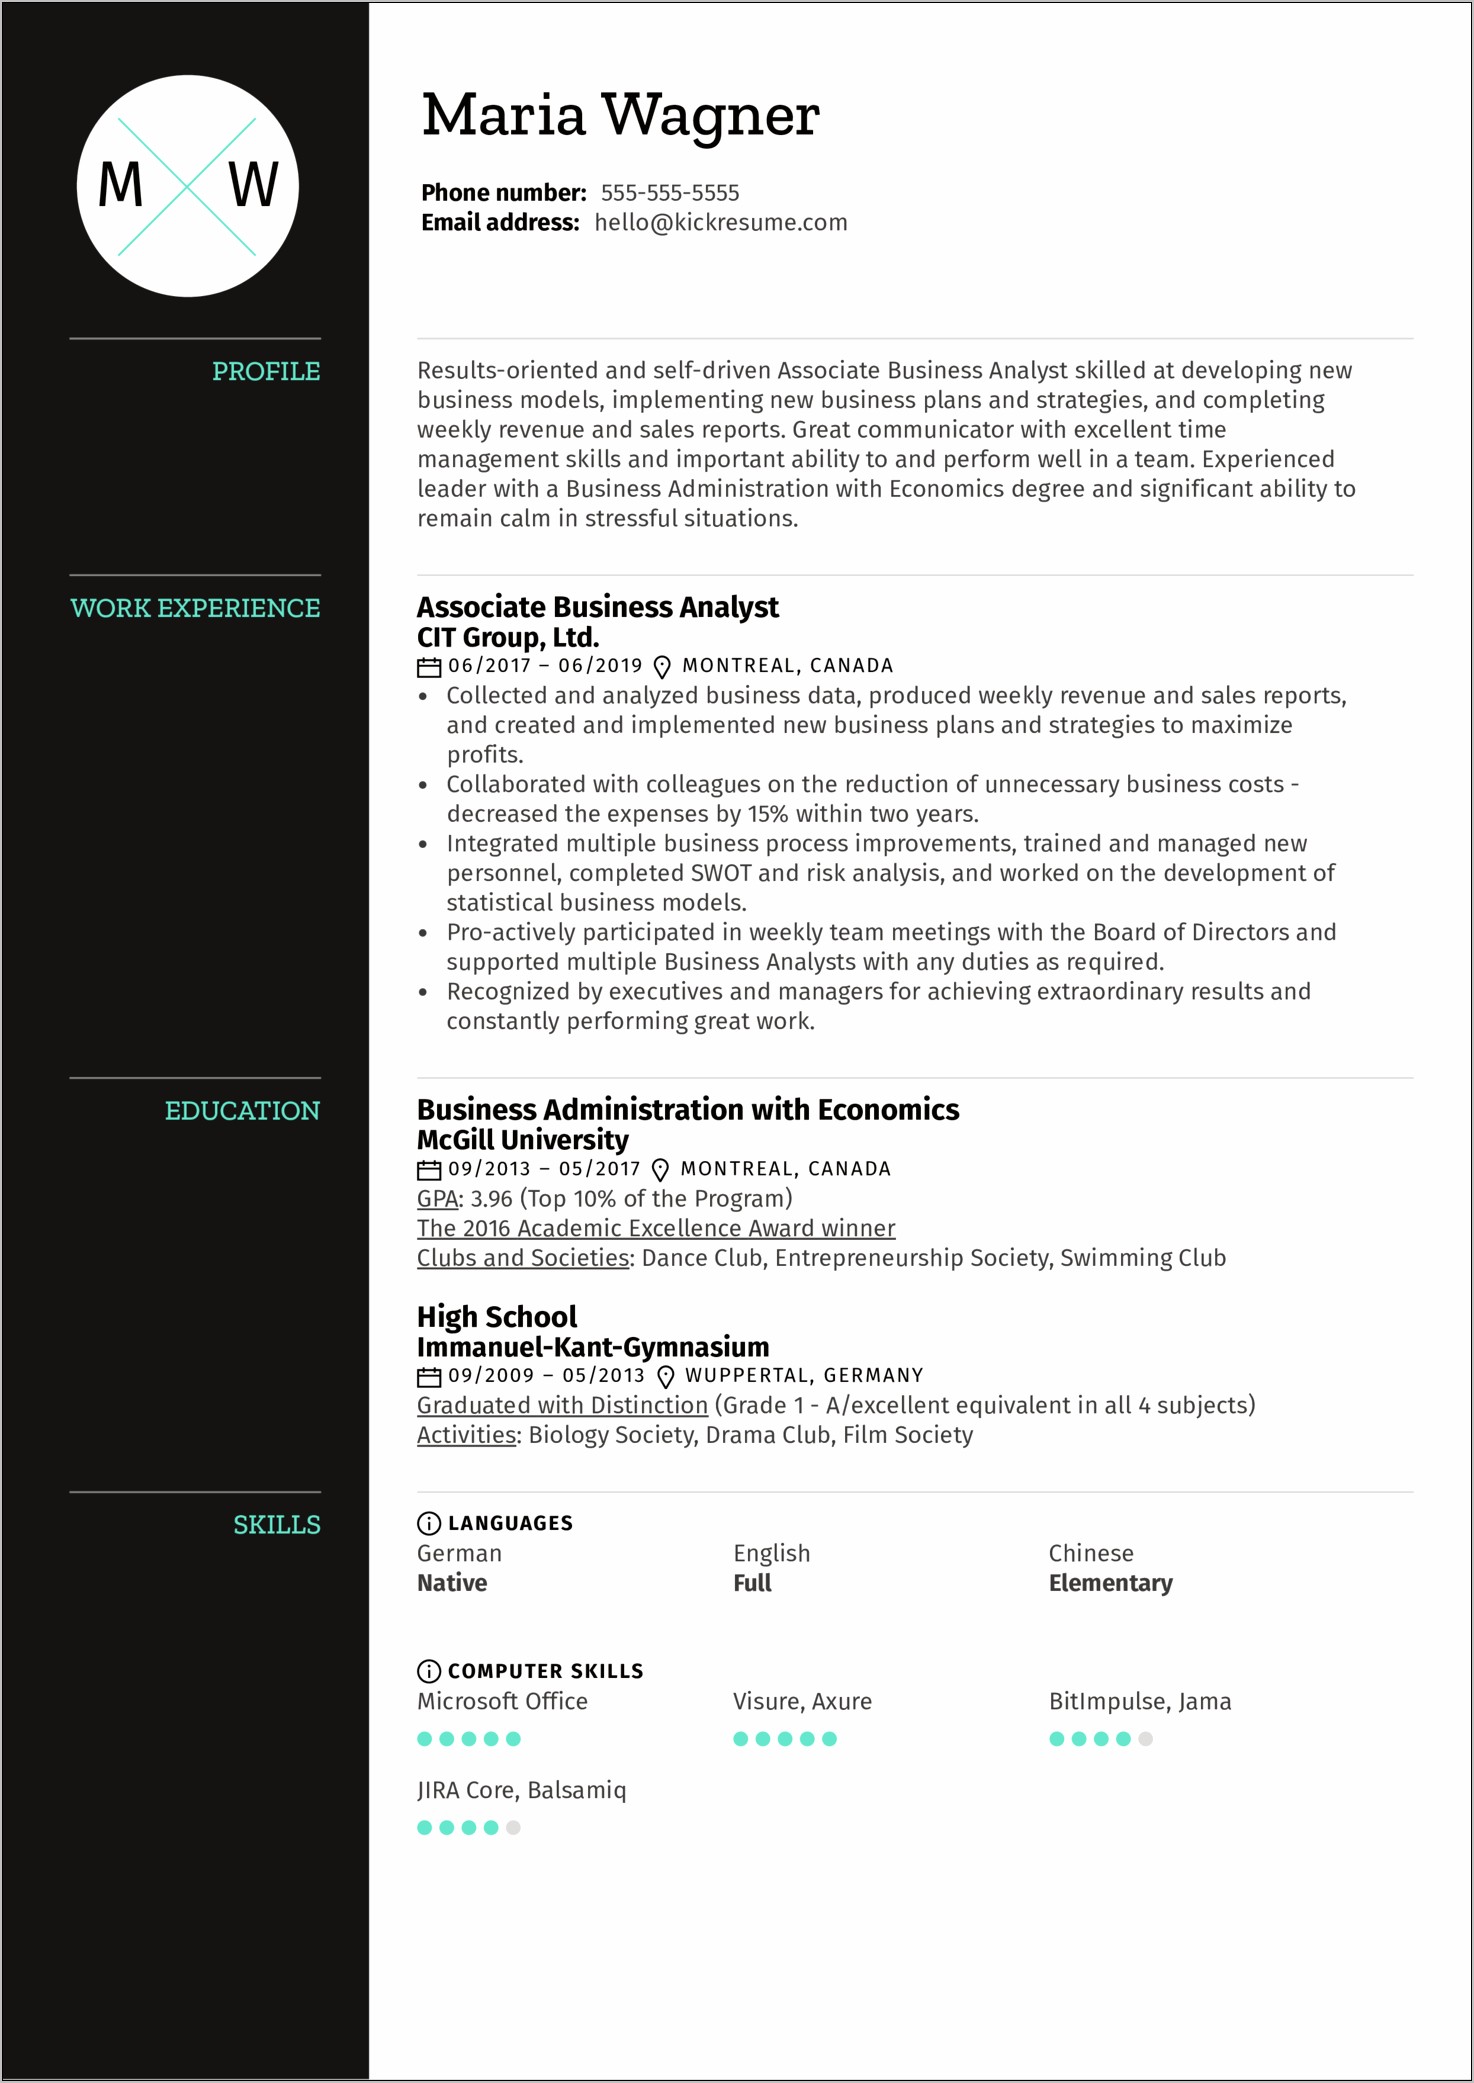 Content Management System Business Analyst Resume